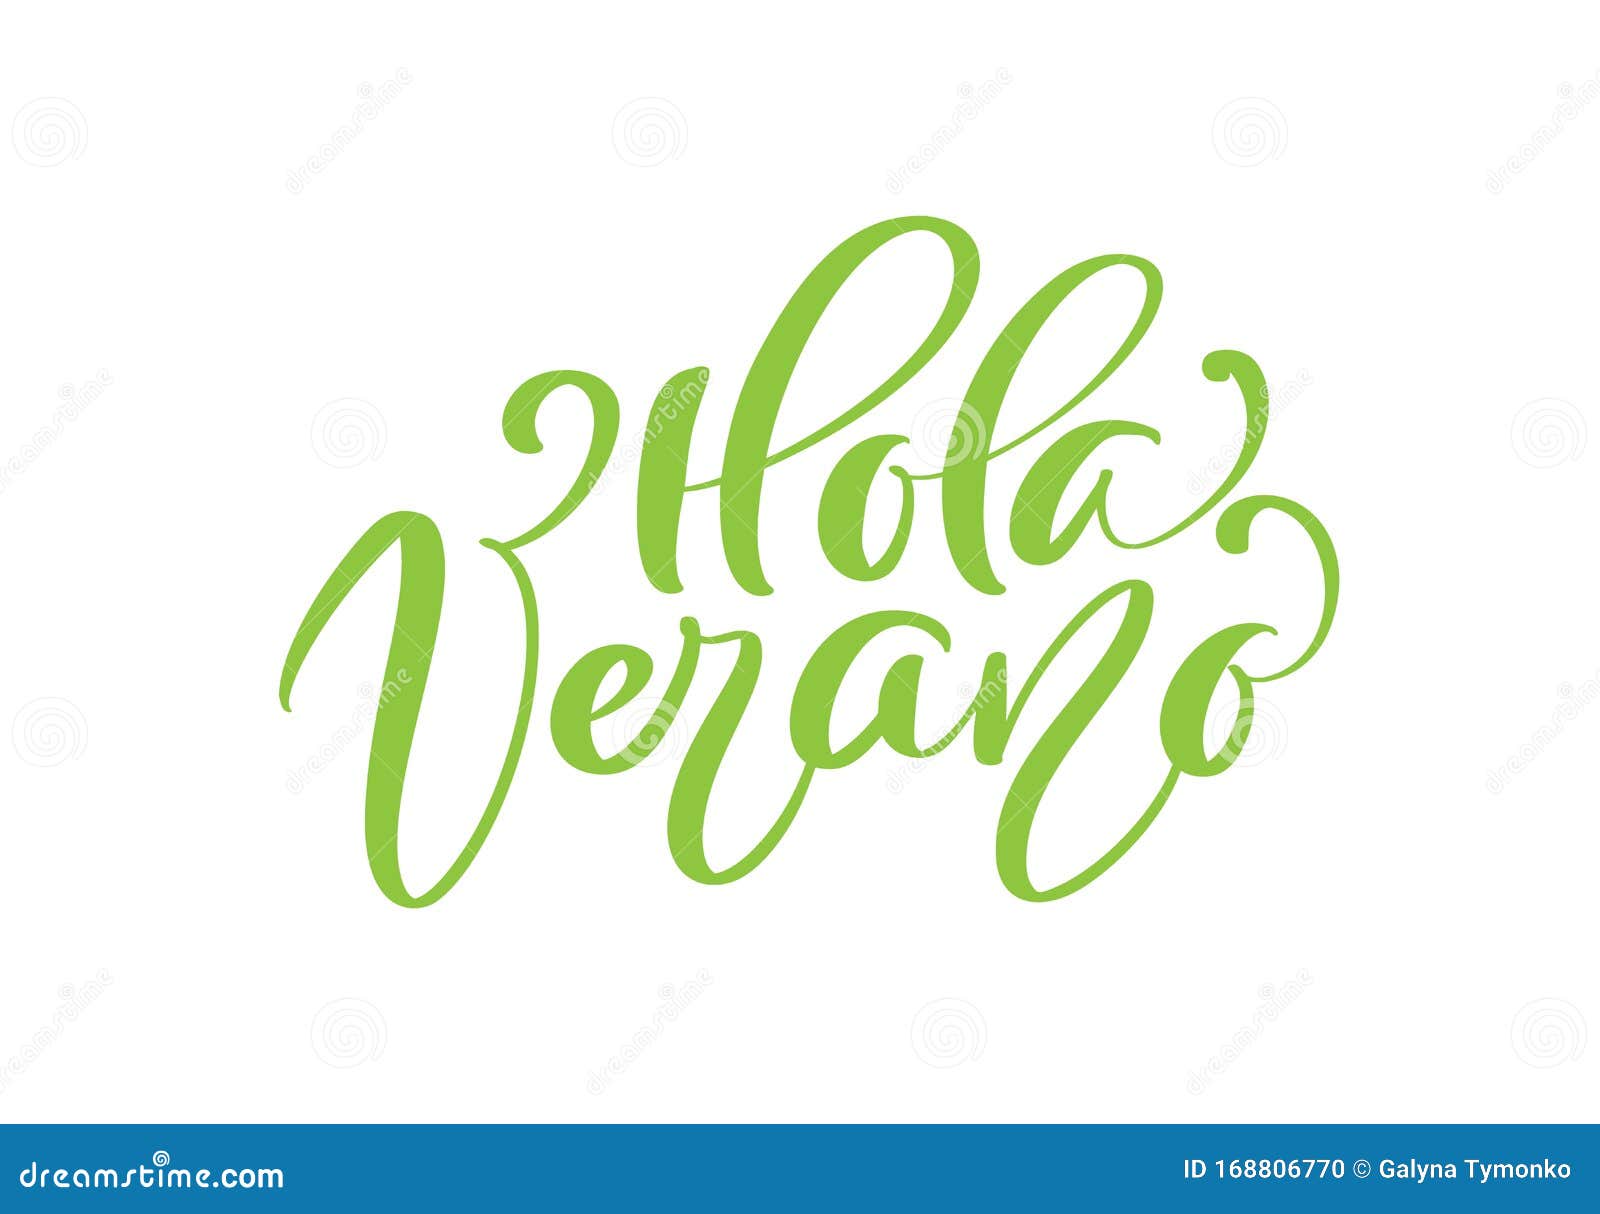 hola verano green calligraphic lettering text hello summer on spanish. phrase for invitation, poster, greeting card